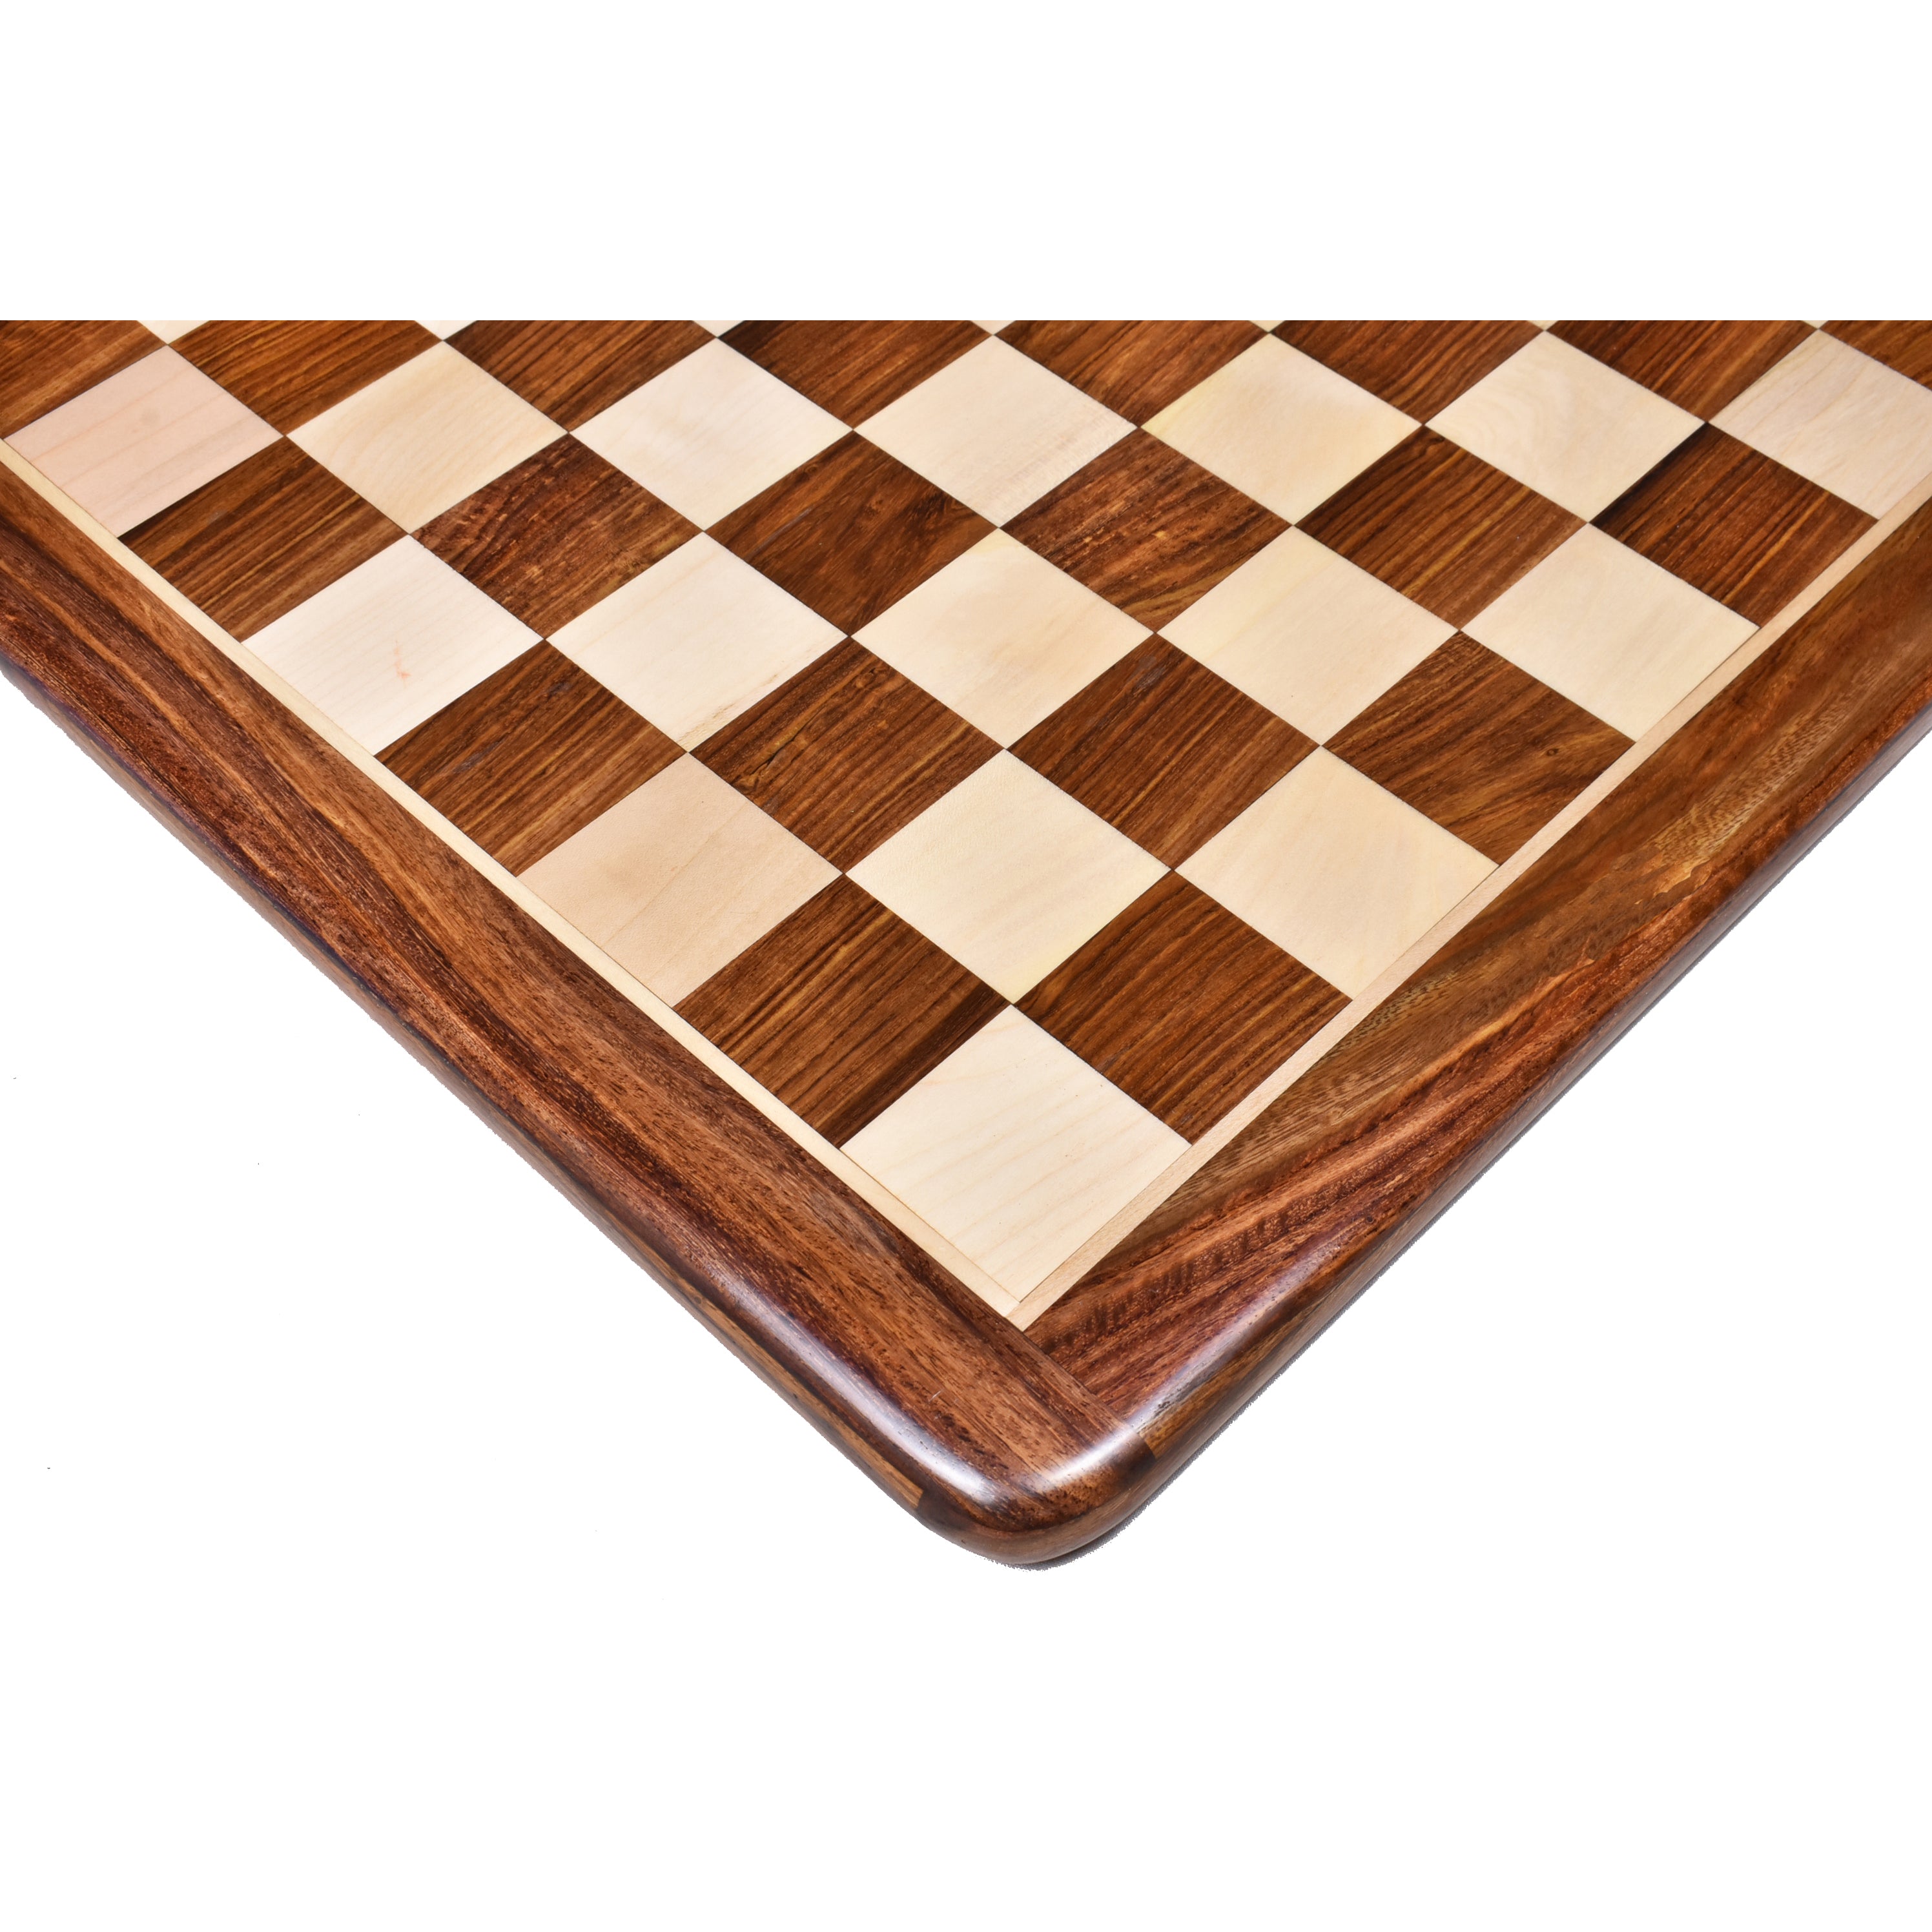 21 Large Chess board - Golden Rosewood & Maple - Algebraic Notations